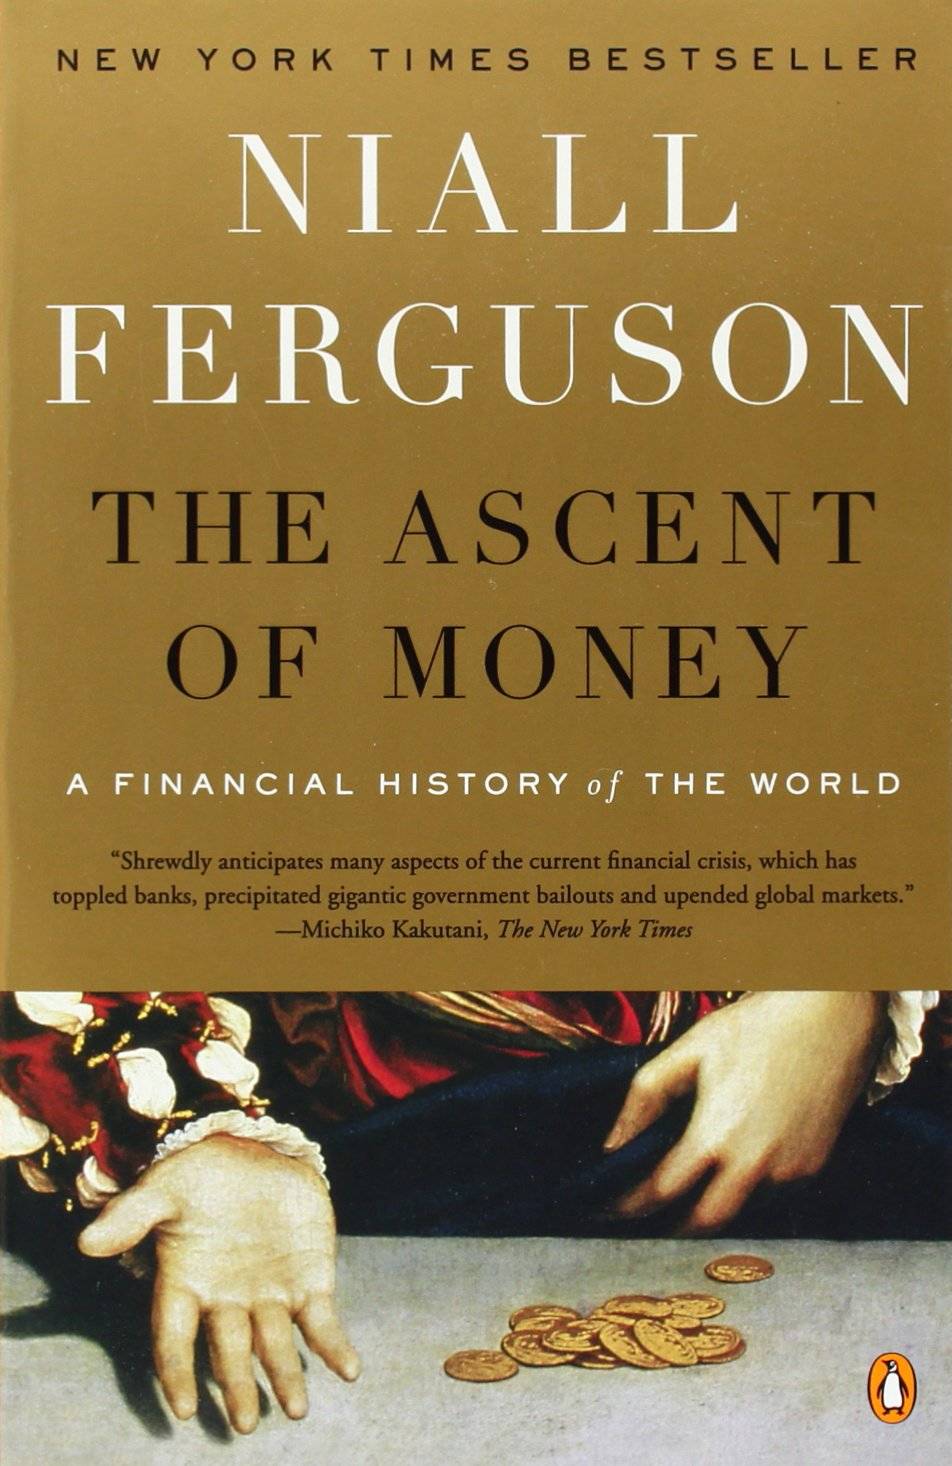 Coca-Cola CEO Muhtar Kent: "The Ascent of Money: A Financial History of the World" by Niall Ferguson